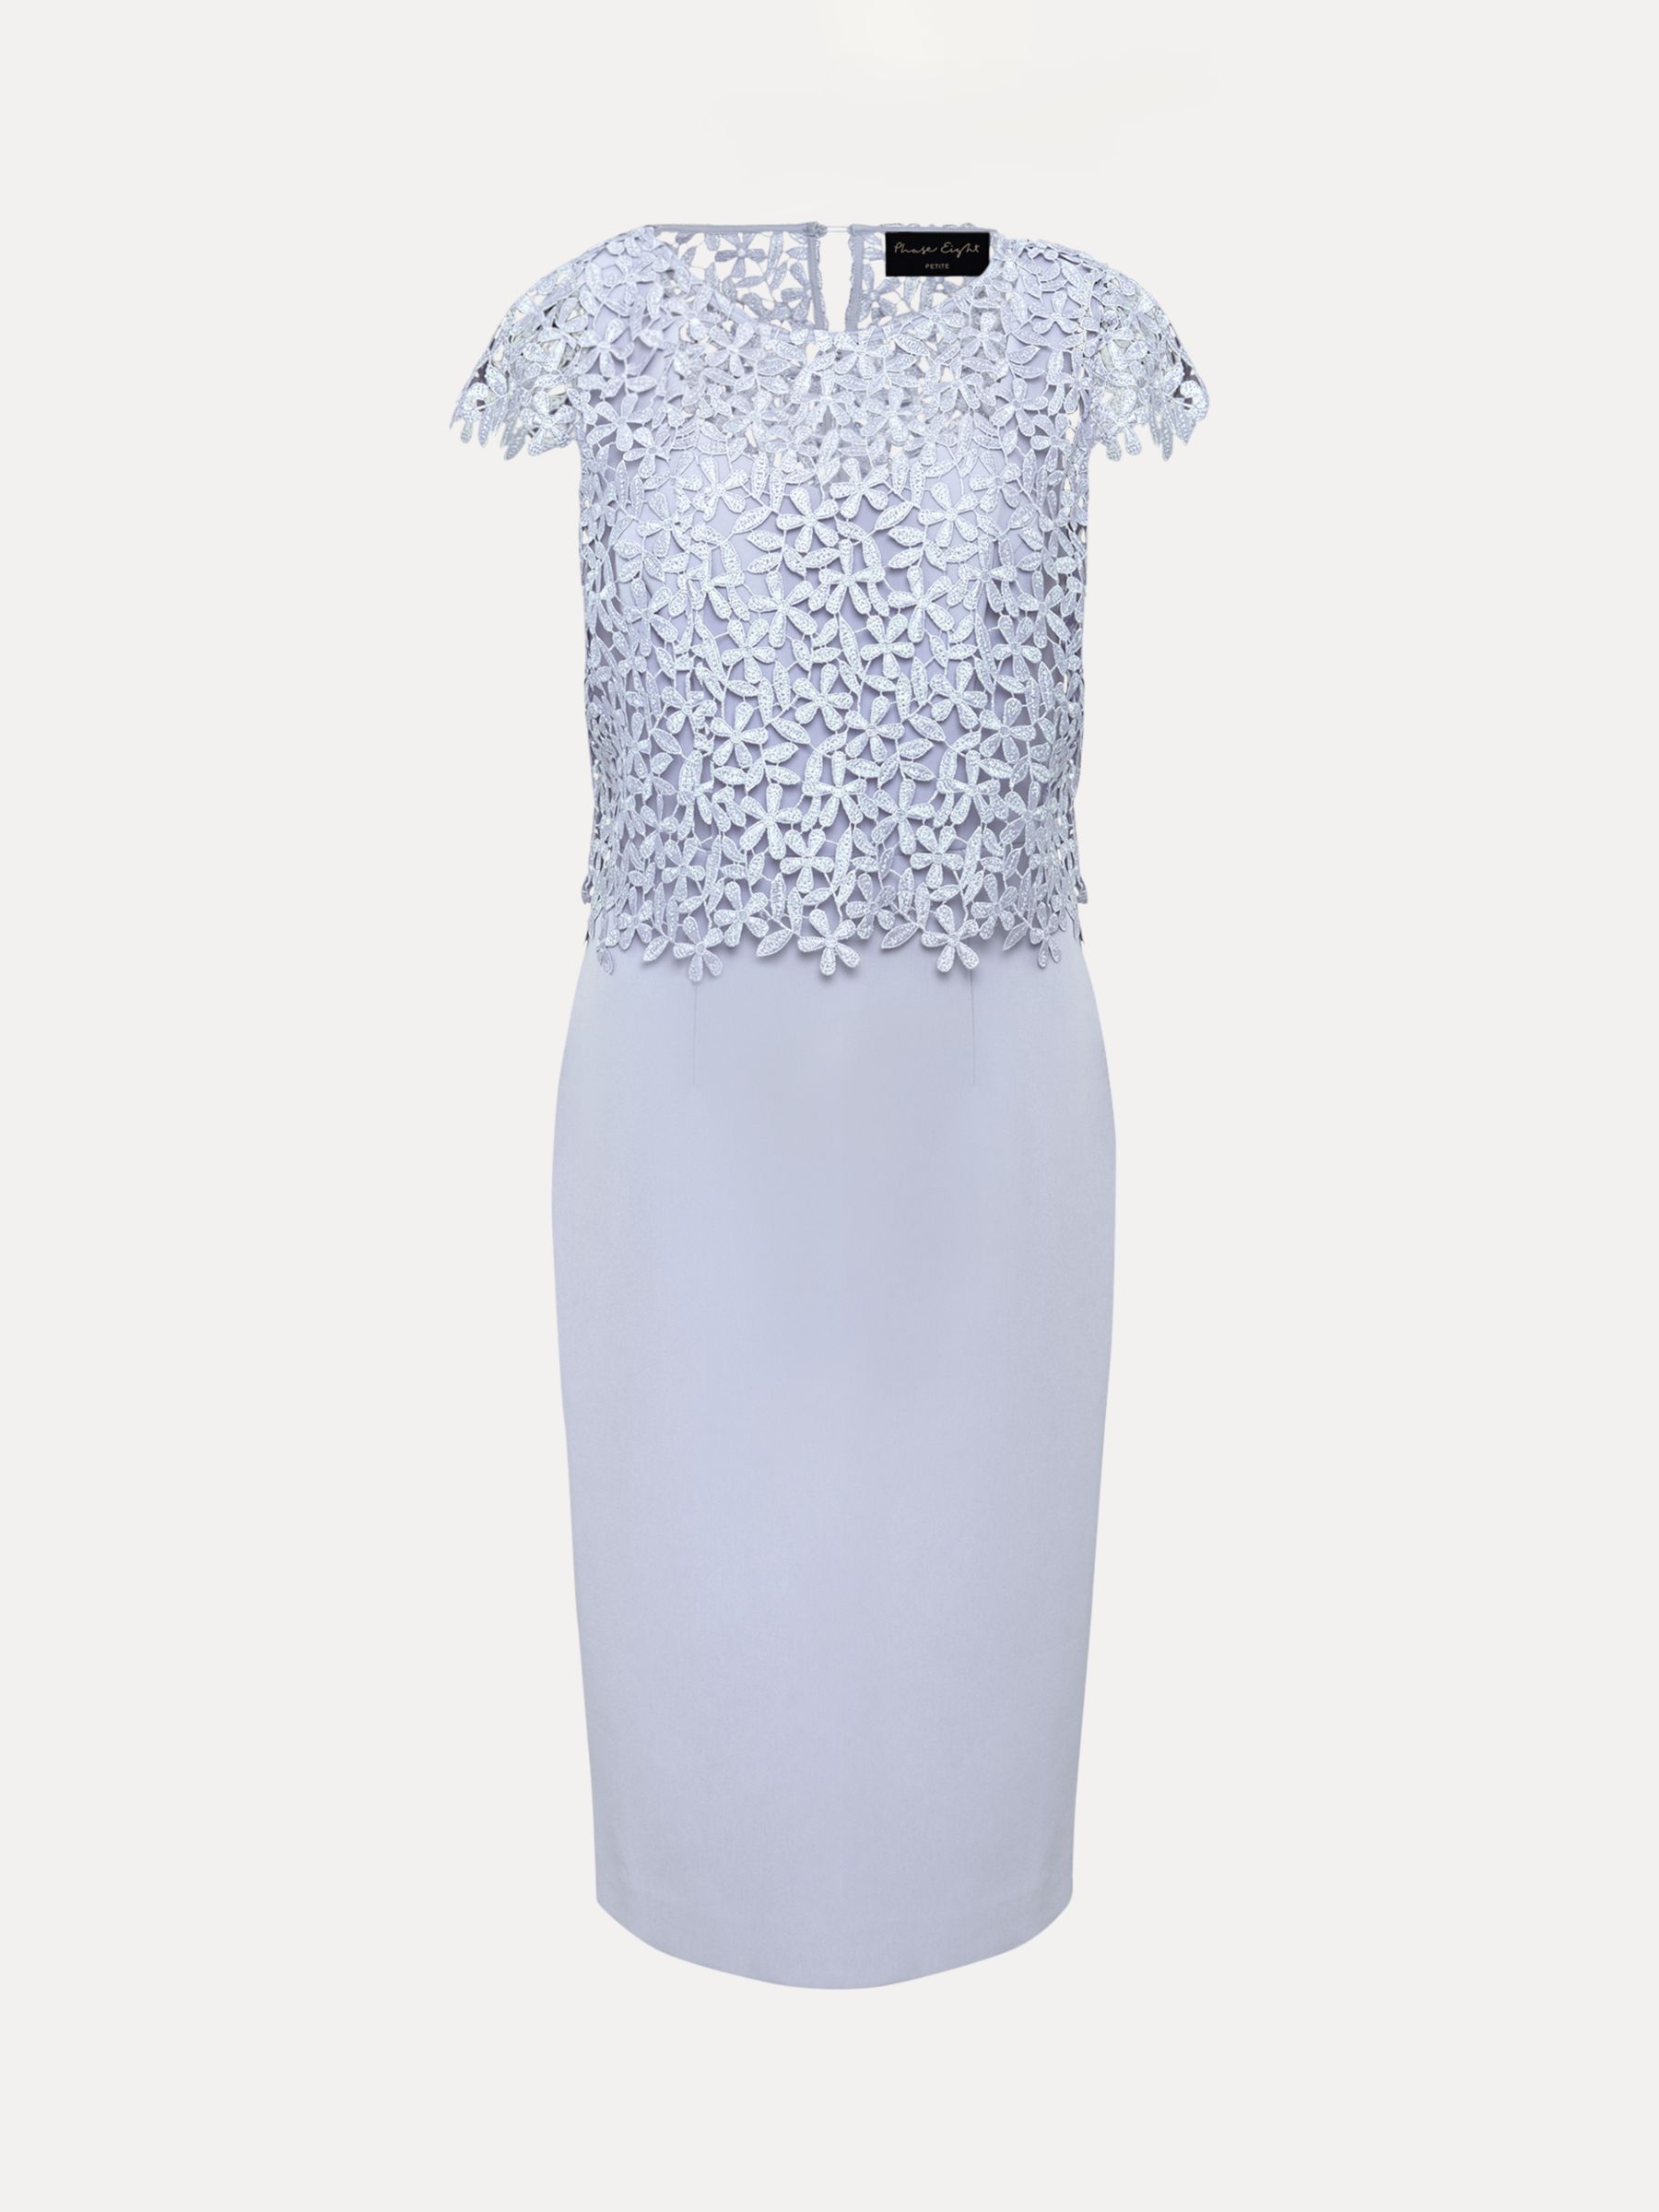 Buy Phase Eight Petite Daisy Textured Bodice Dress Online at johnlewis.com